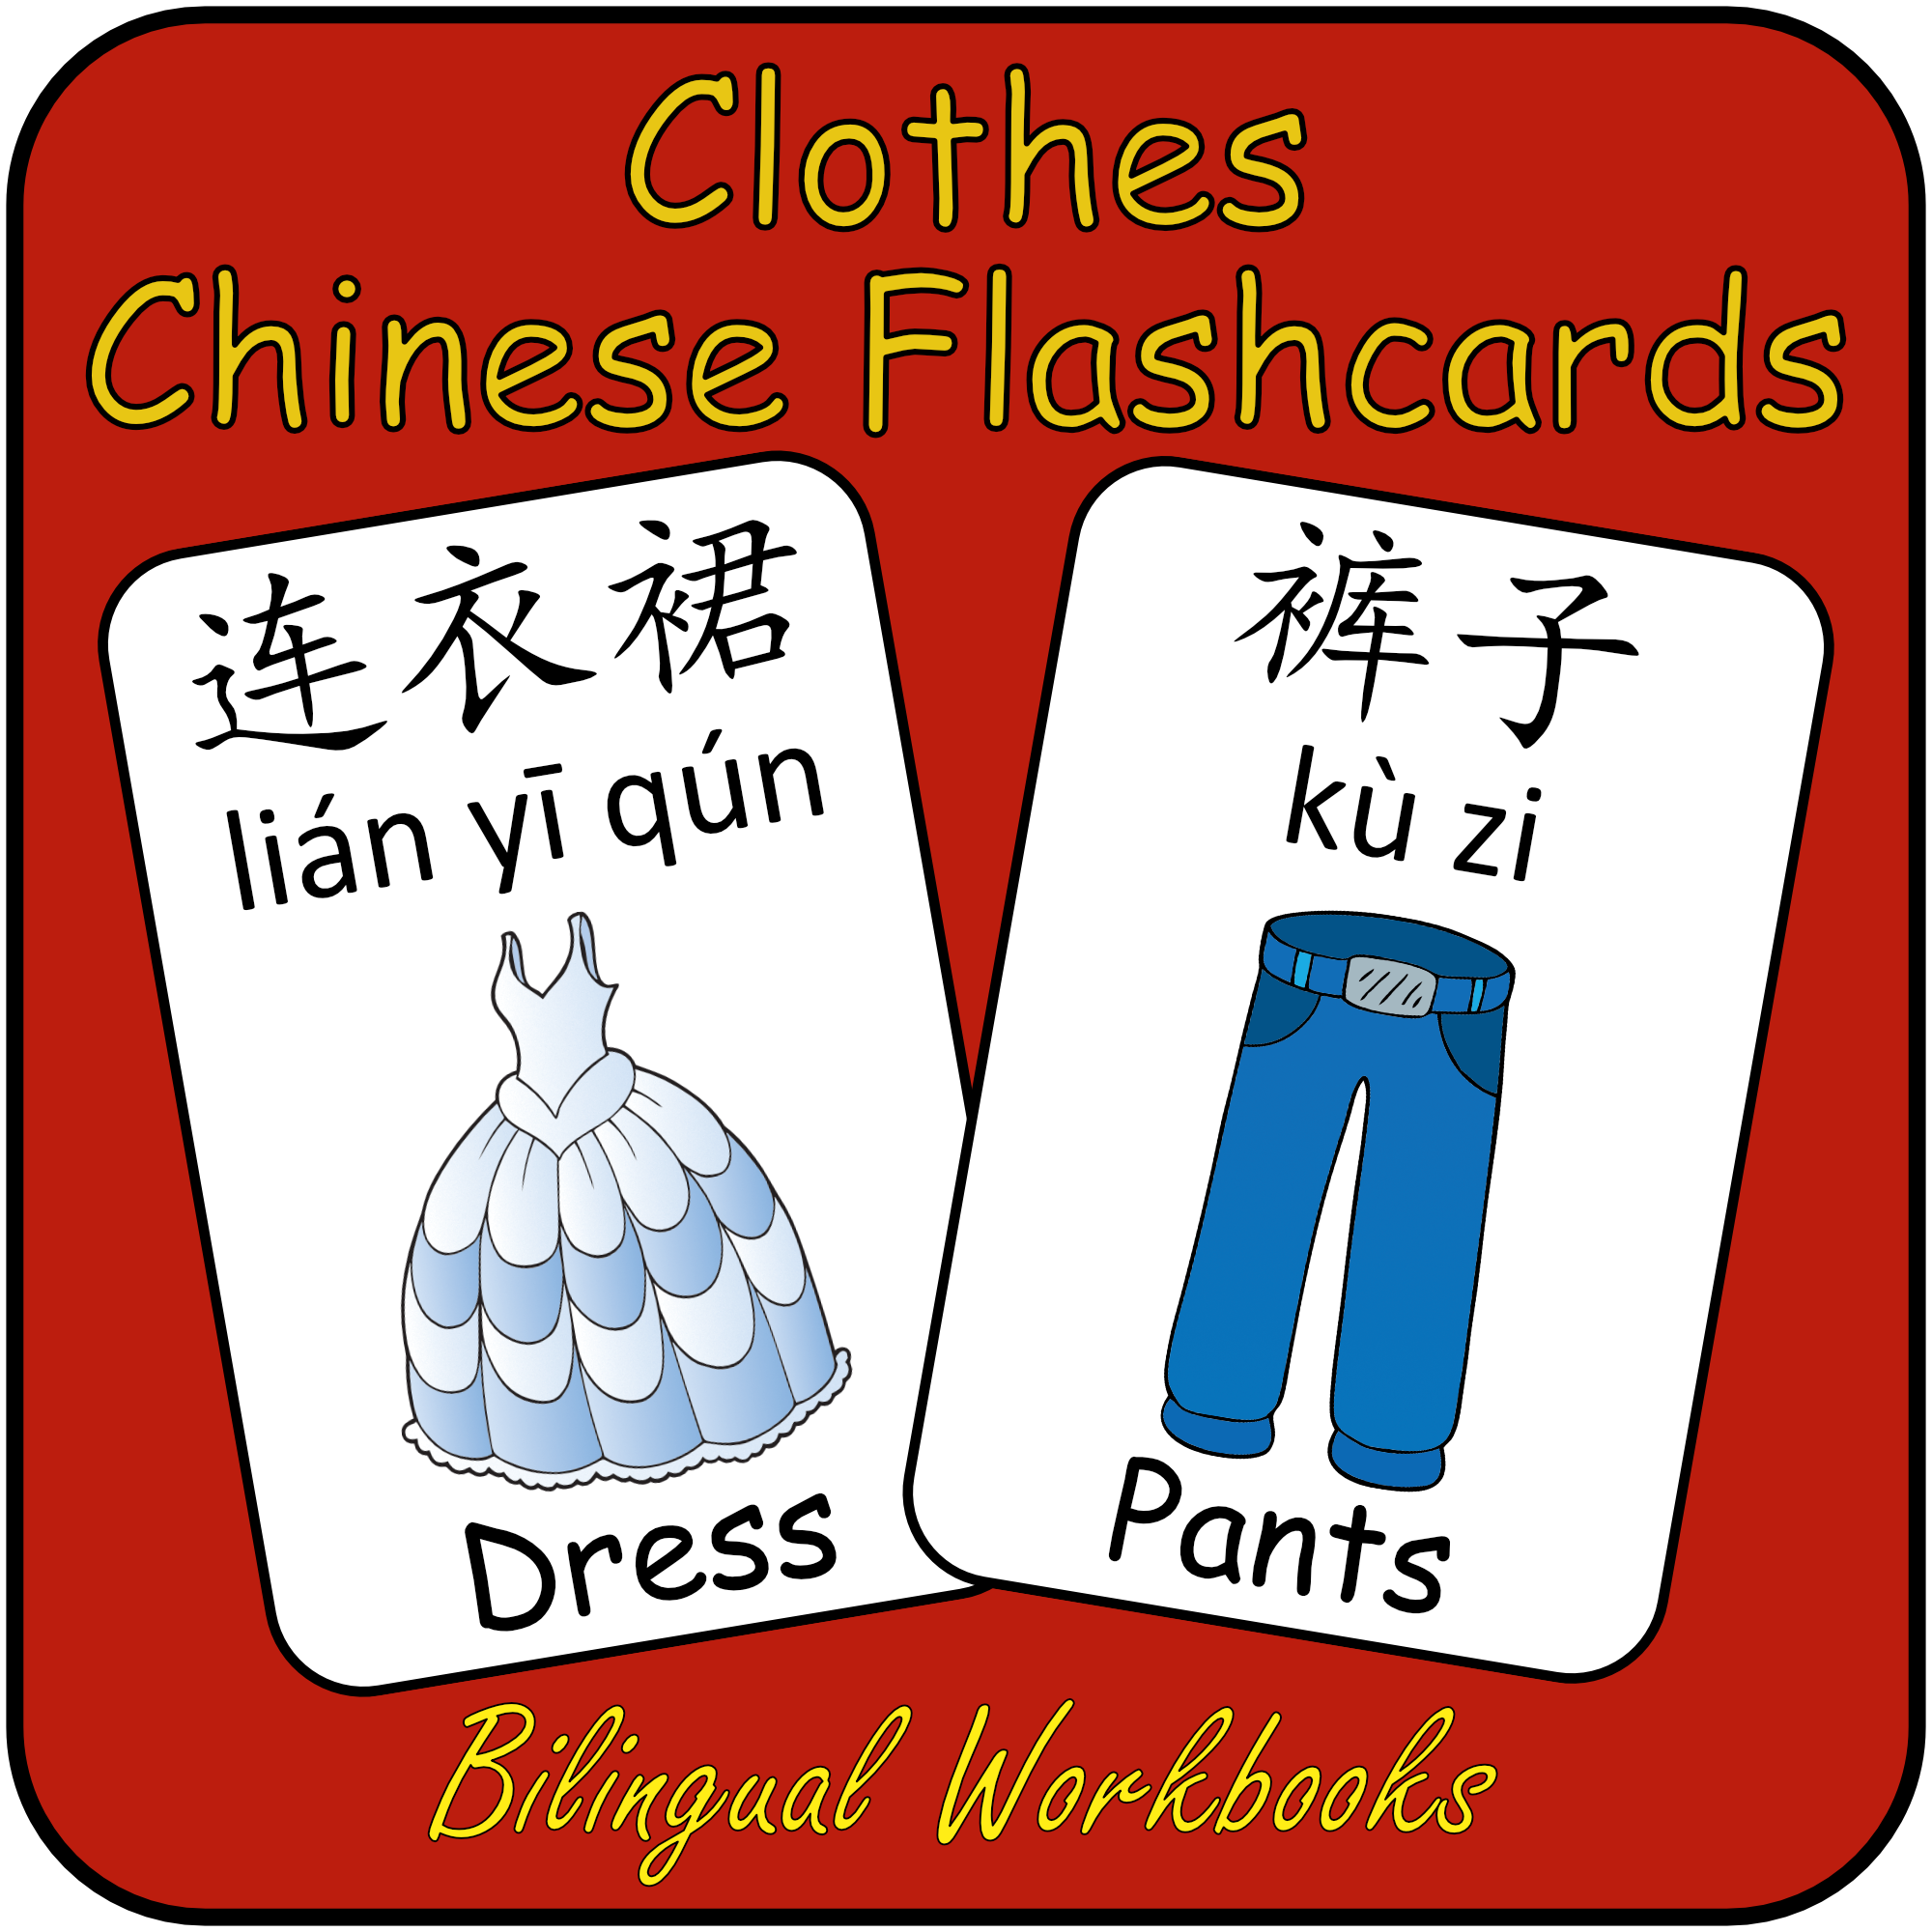 Mandarin Chinese First Words Flashcards - Clothes flash cards with English name, Simplified Chinese Character and Pinyin